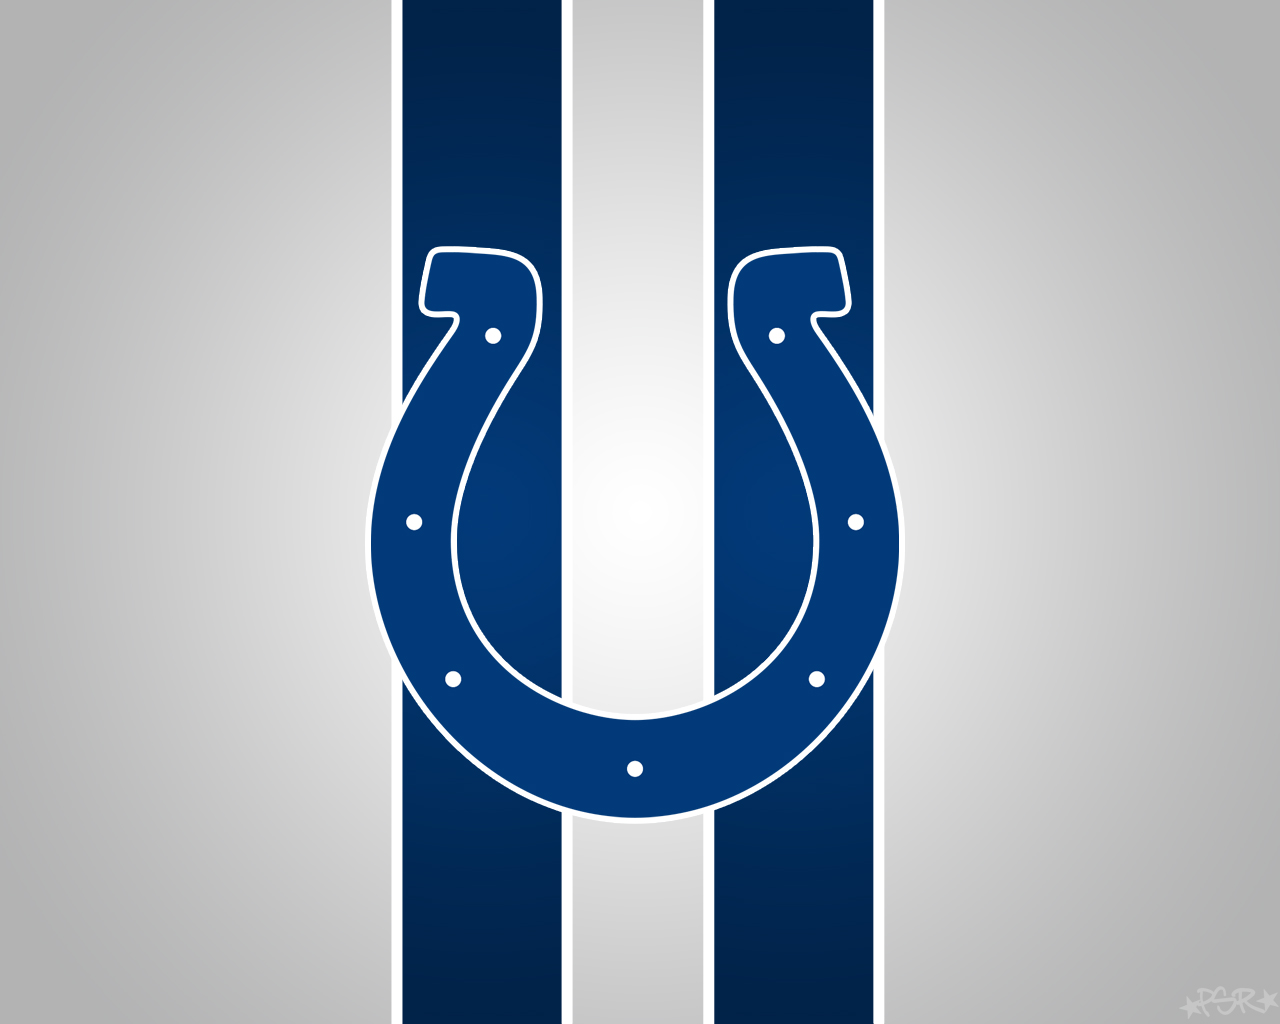 Indianapolis Colts wallpapers for desktop, download free Indianapolis Colts  pictures and backgrounds for PC